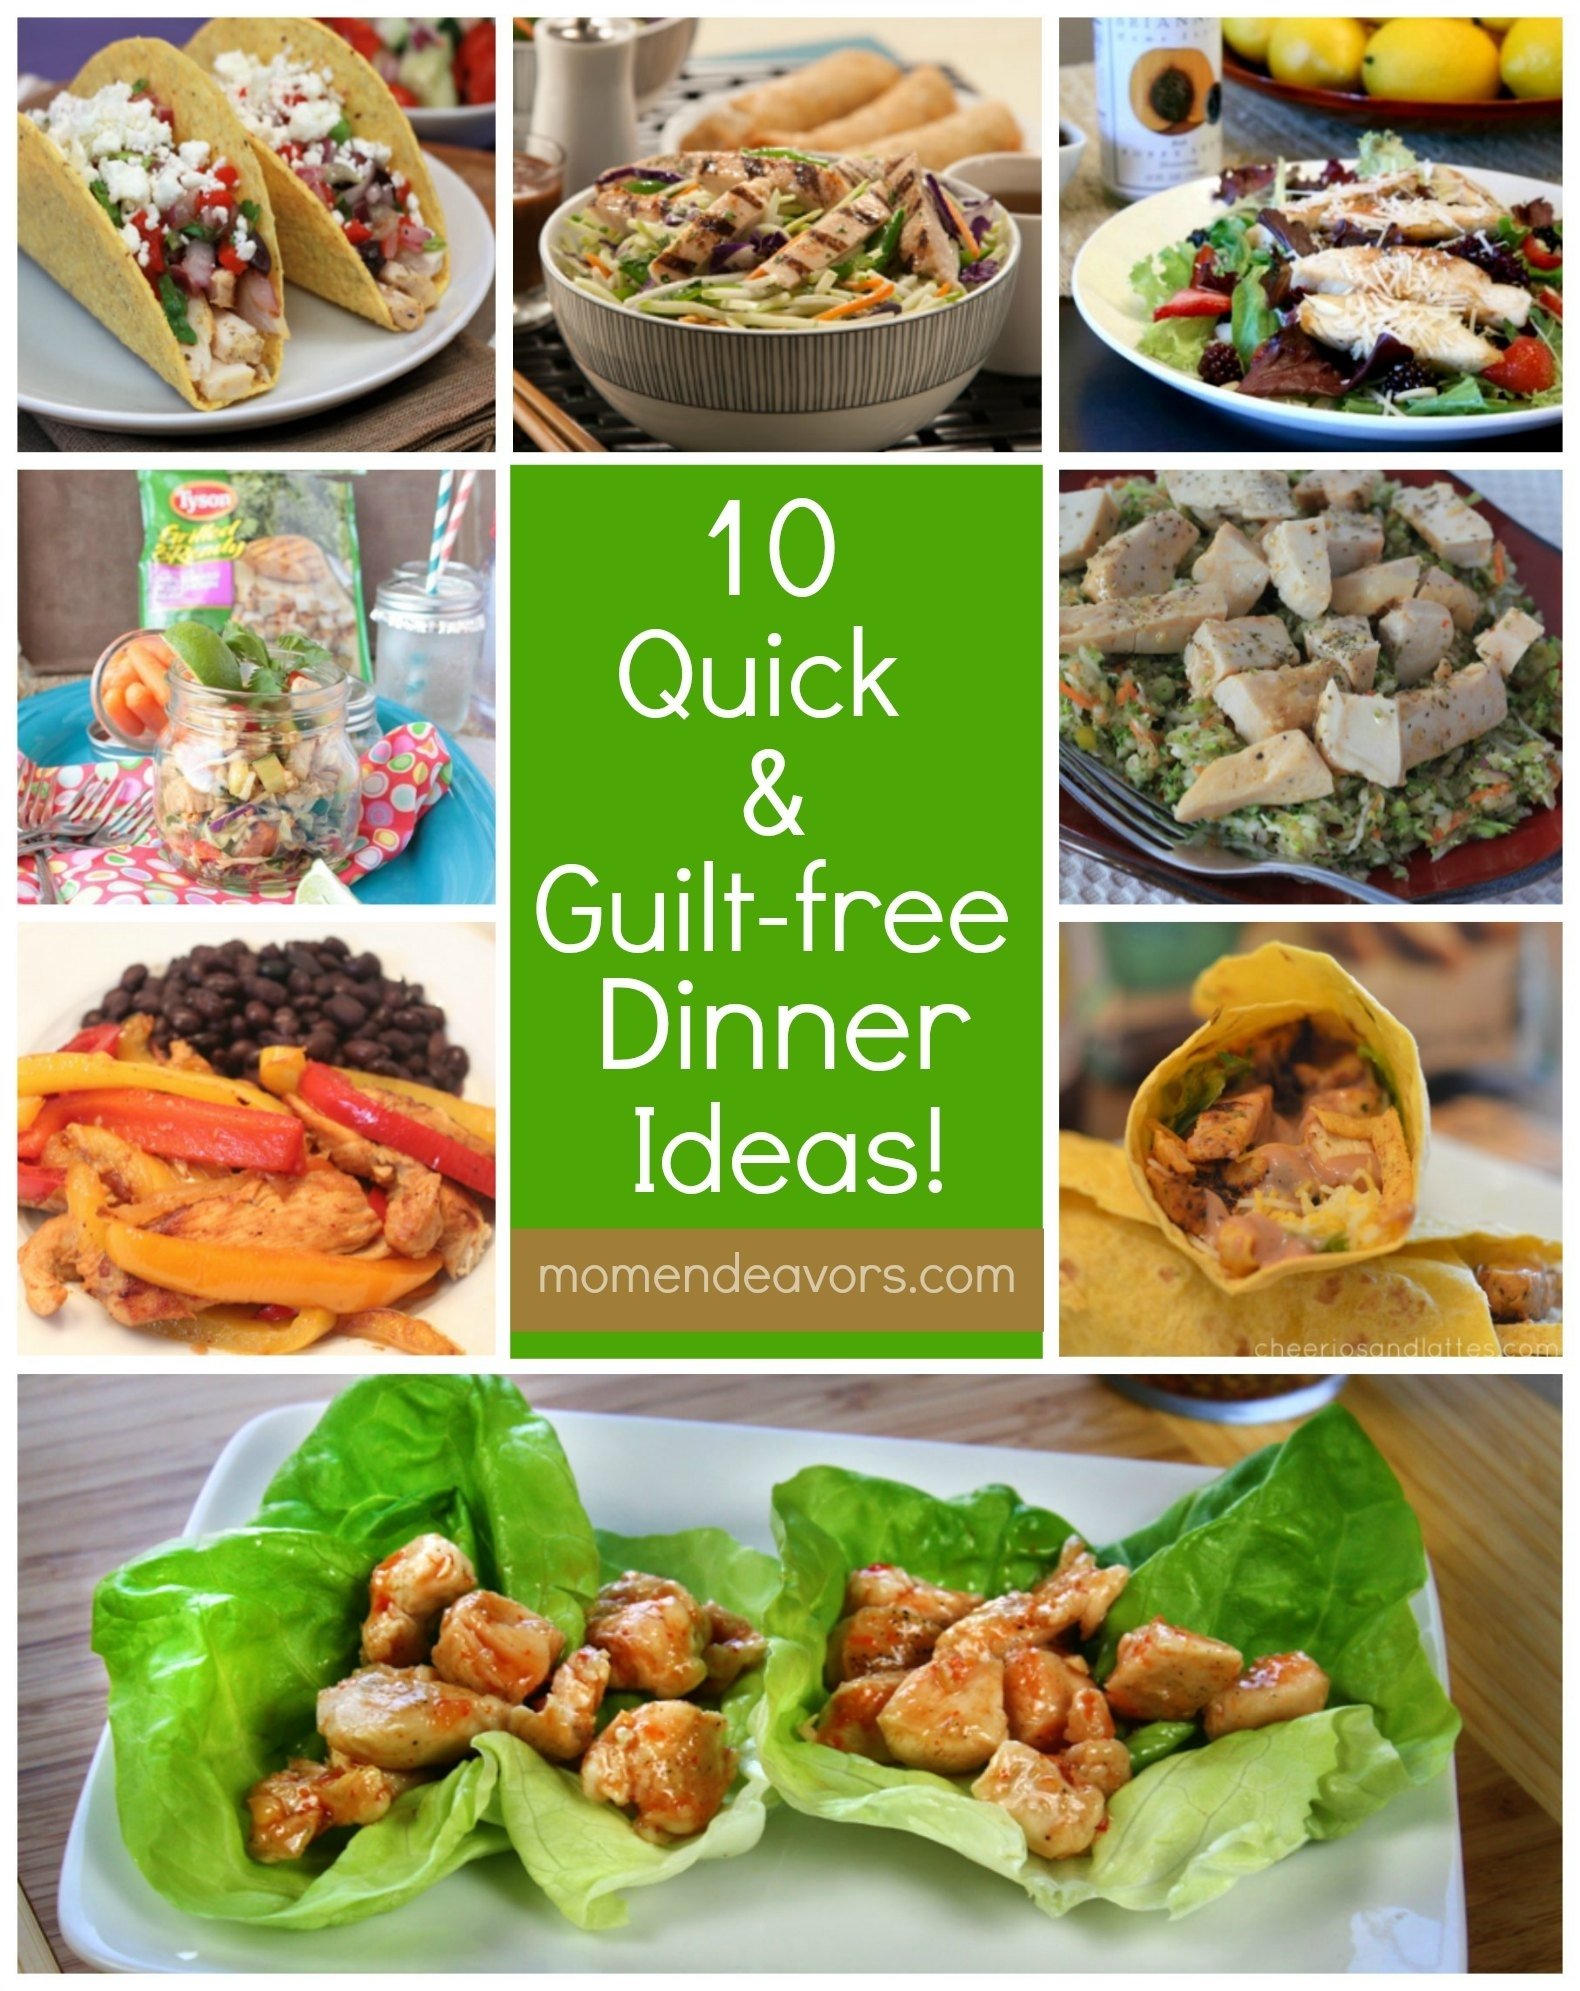 10 Pretty Healthy And Quick Lunch Ideas 10 quick guilt free dinner ideas with tyson grilled ready 1 2022